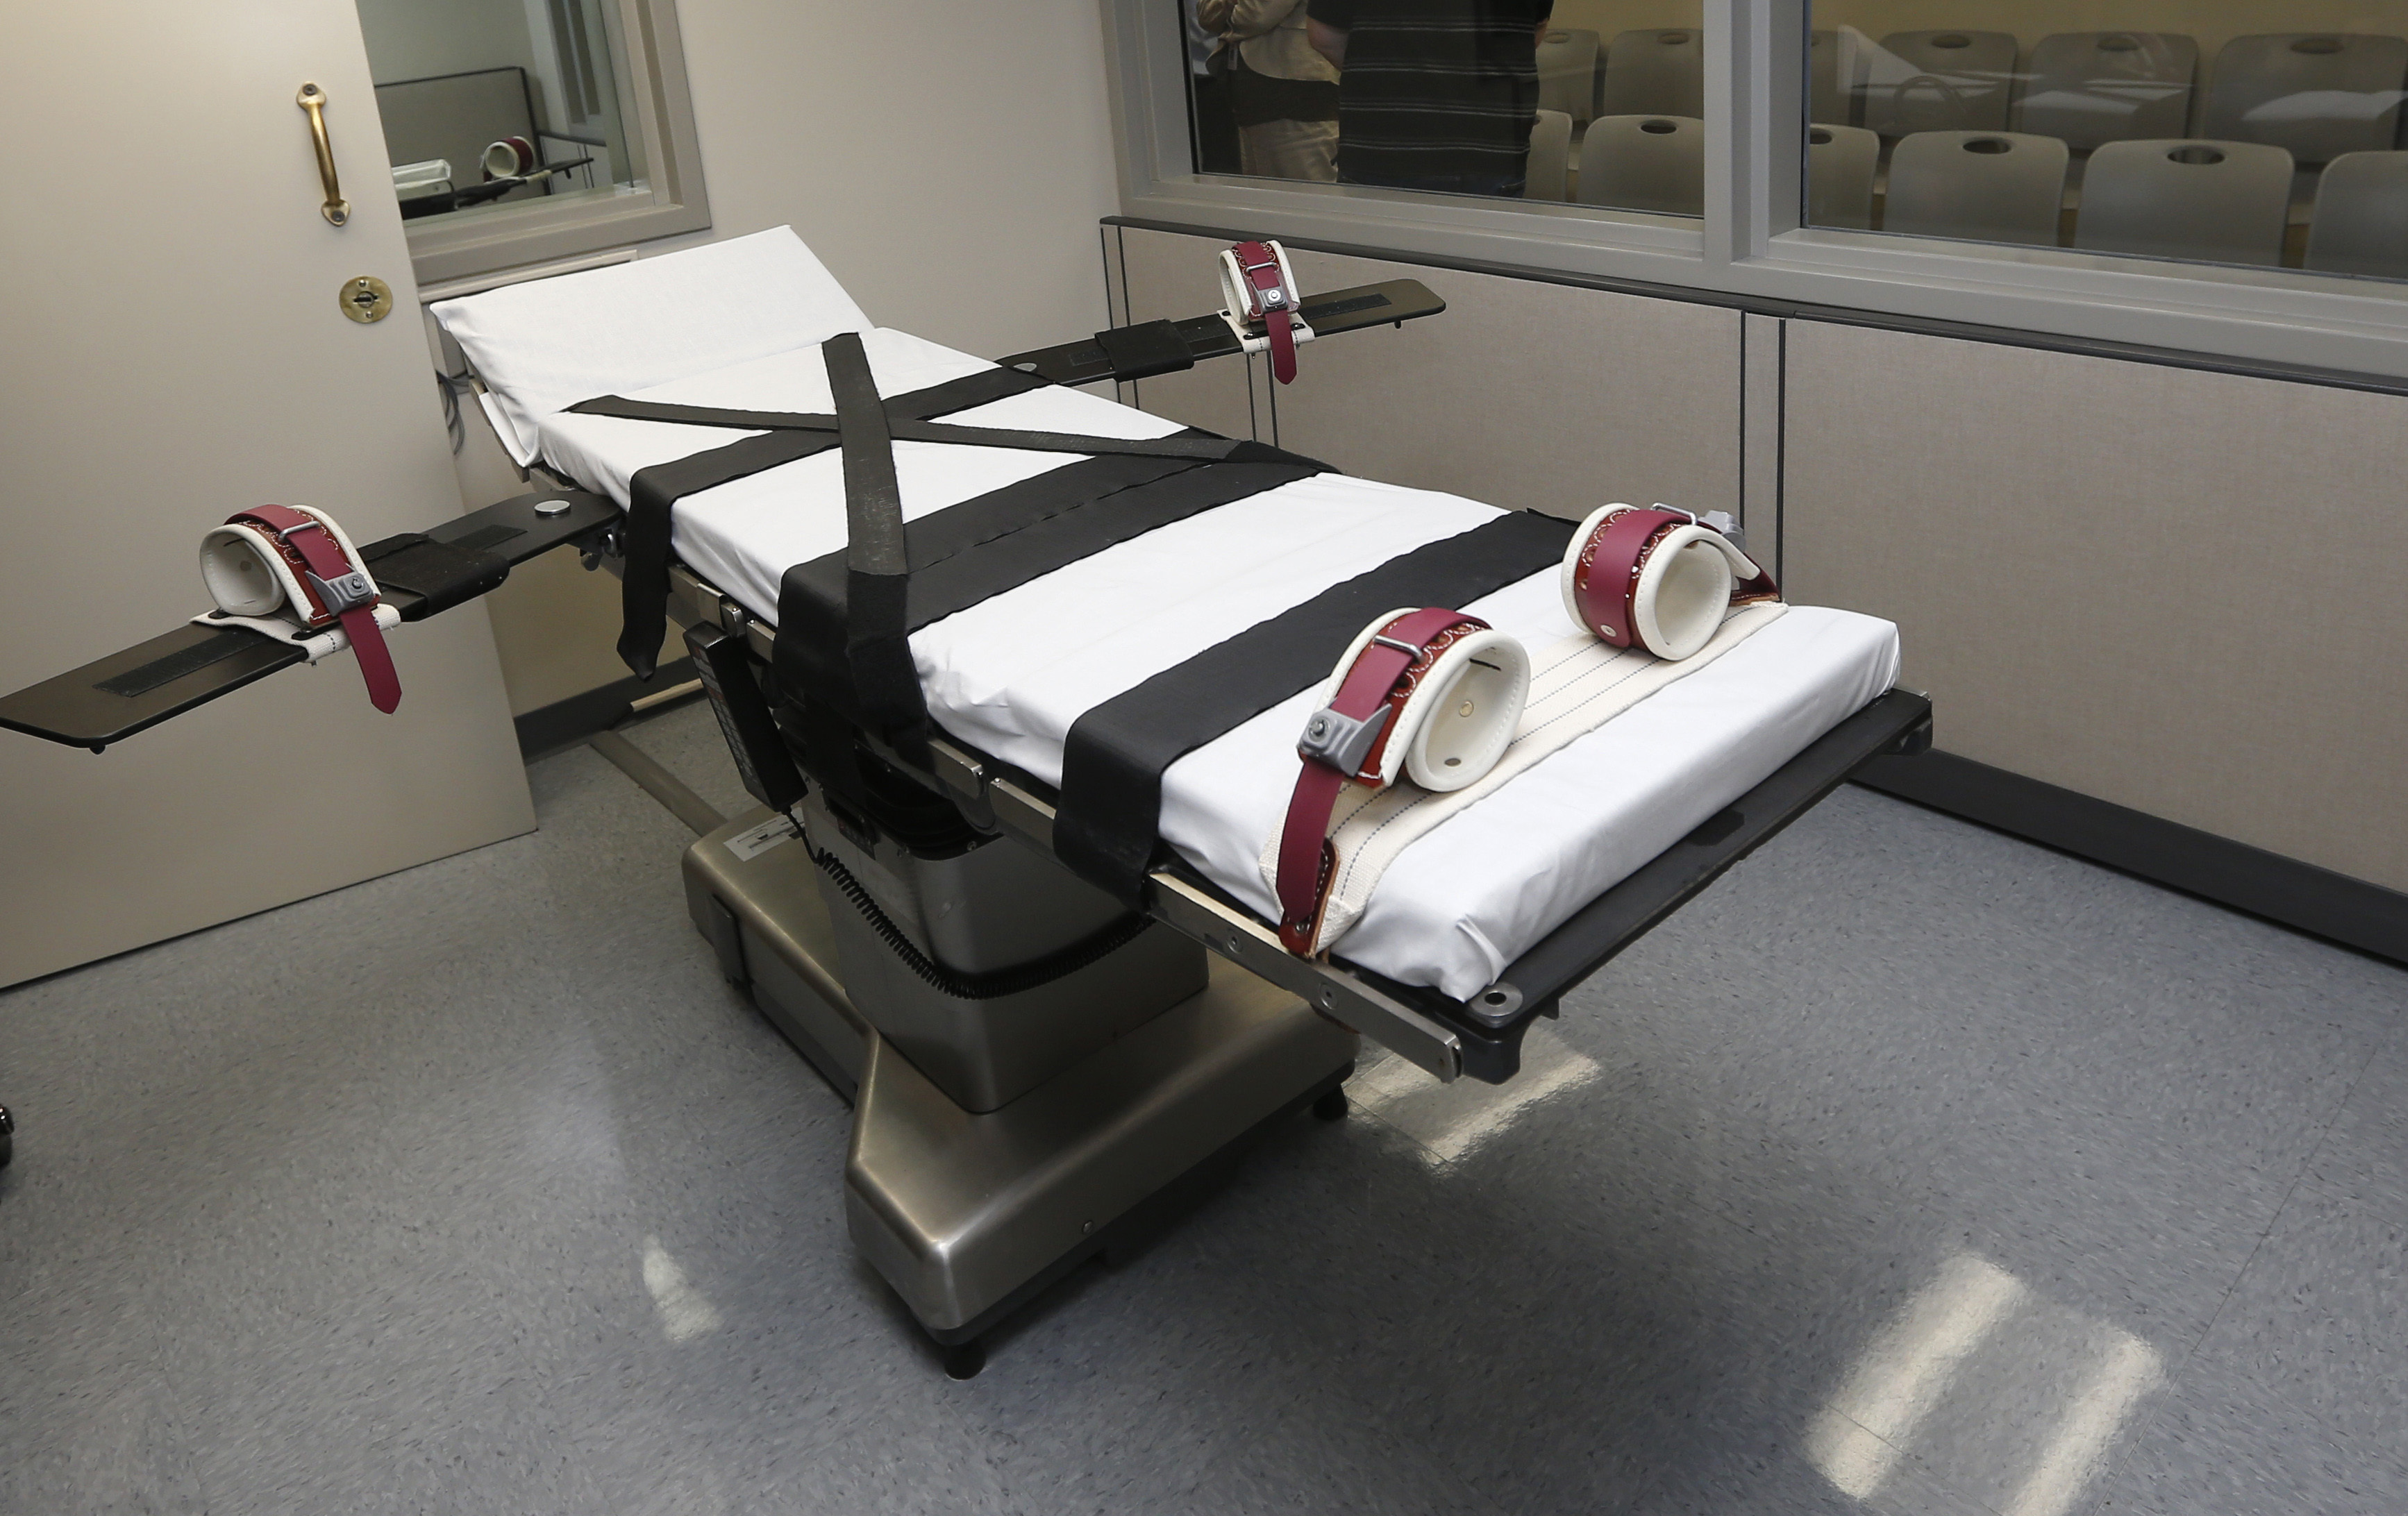 This Oct. 9, 2014, file photo shows the gurney in the the execution chamber at the Oklahoma State Penitentiary in McAlester, Okla. Voters chose Tuesday to provide constitutional protections for the state's death penalty. (Sue Ogrocki—AP)